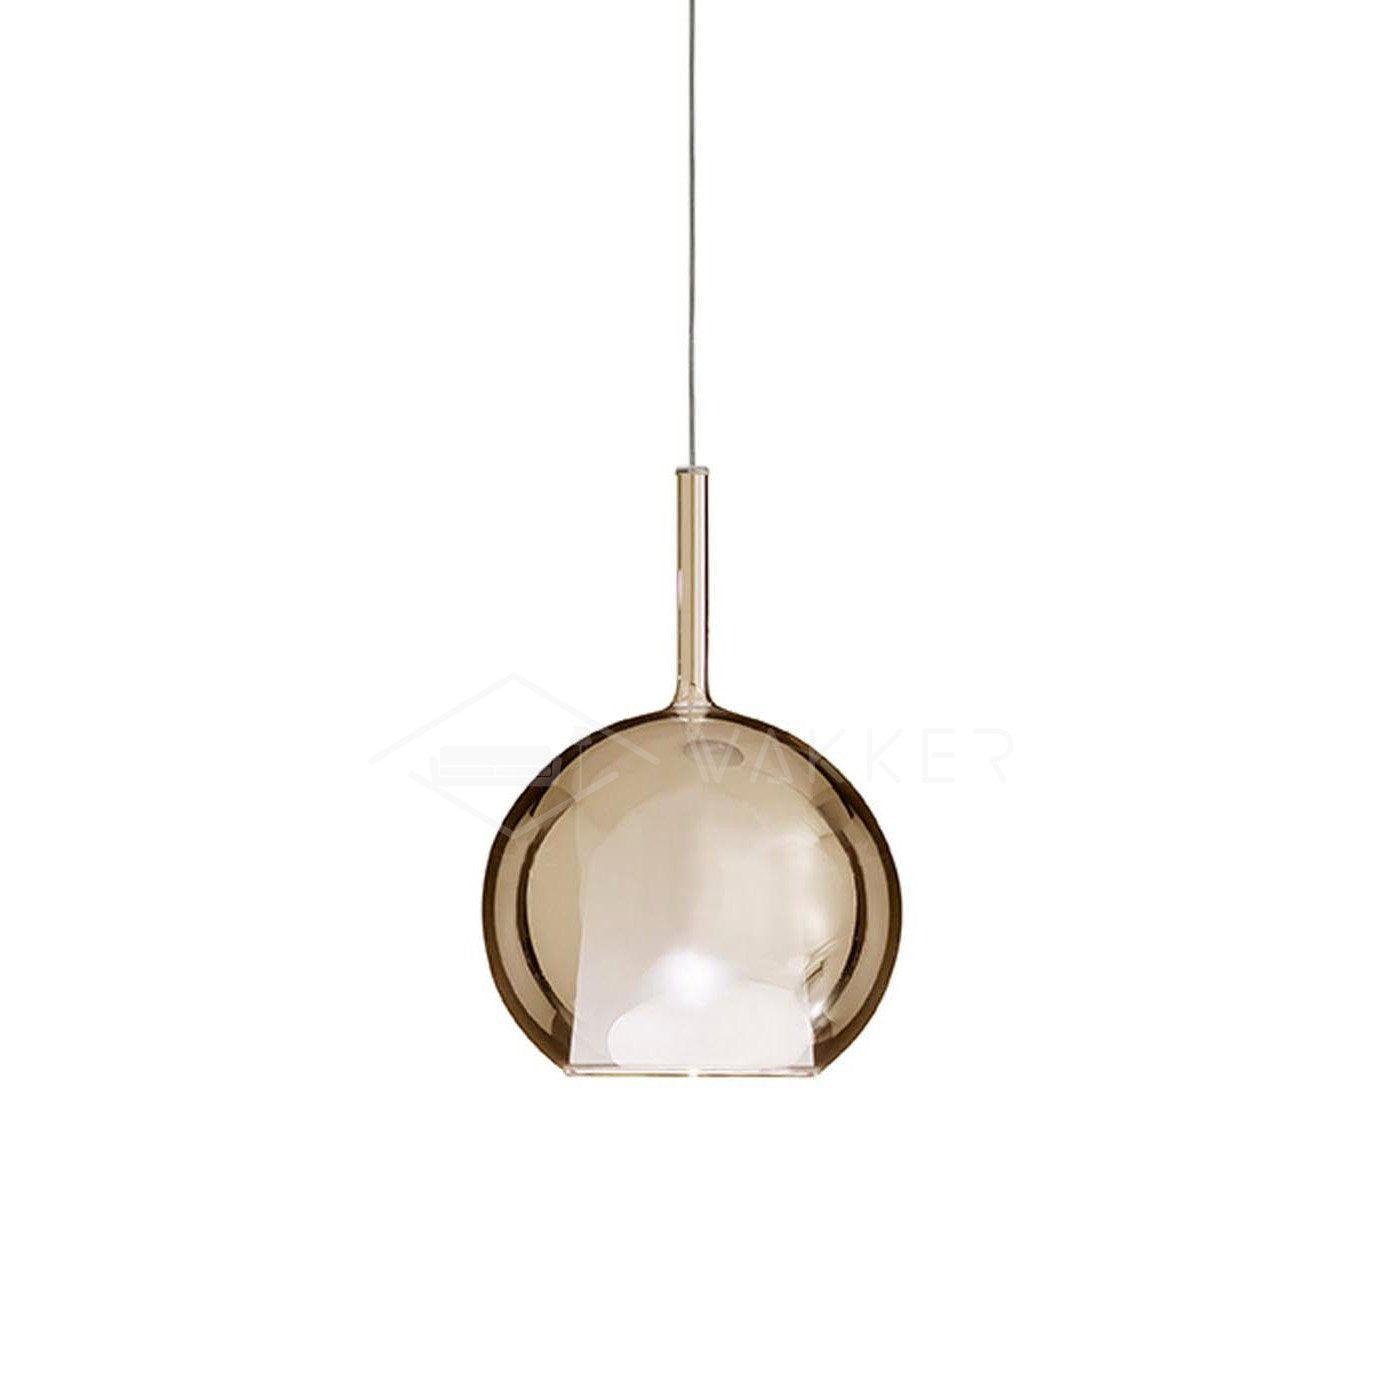 Amber Glow Pendant Light with a Diameter of 5.1 inches and a Height of 11.8 inches (13cm x 30cm)